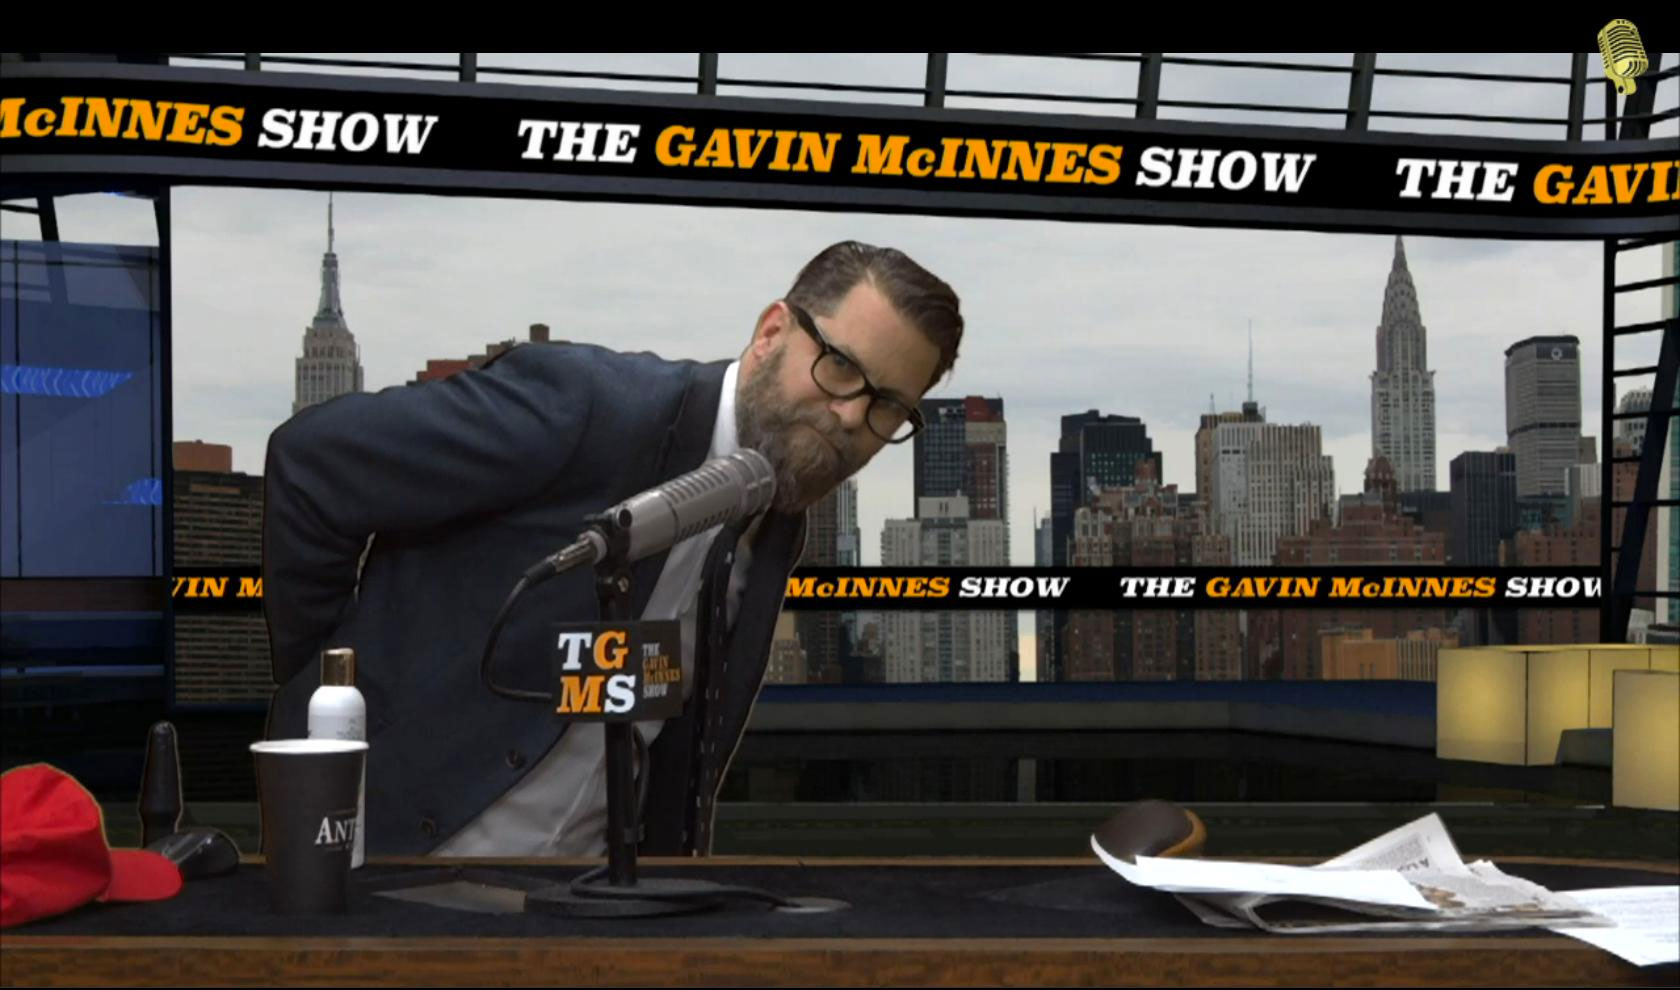 Did You Know that Proud Boys Founder Gavin McInnes Used a Big Dildo on Camera?